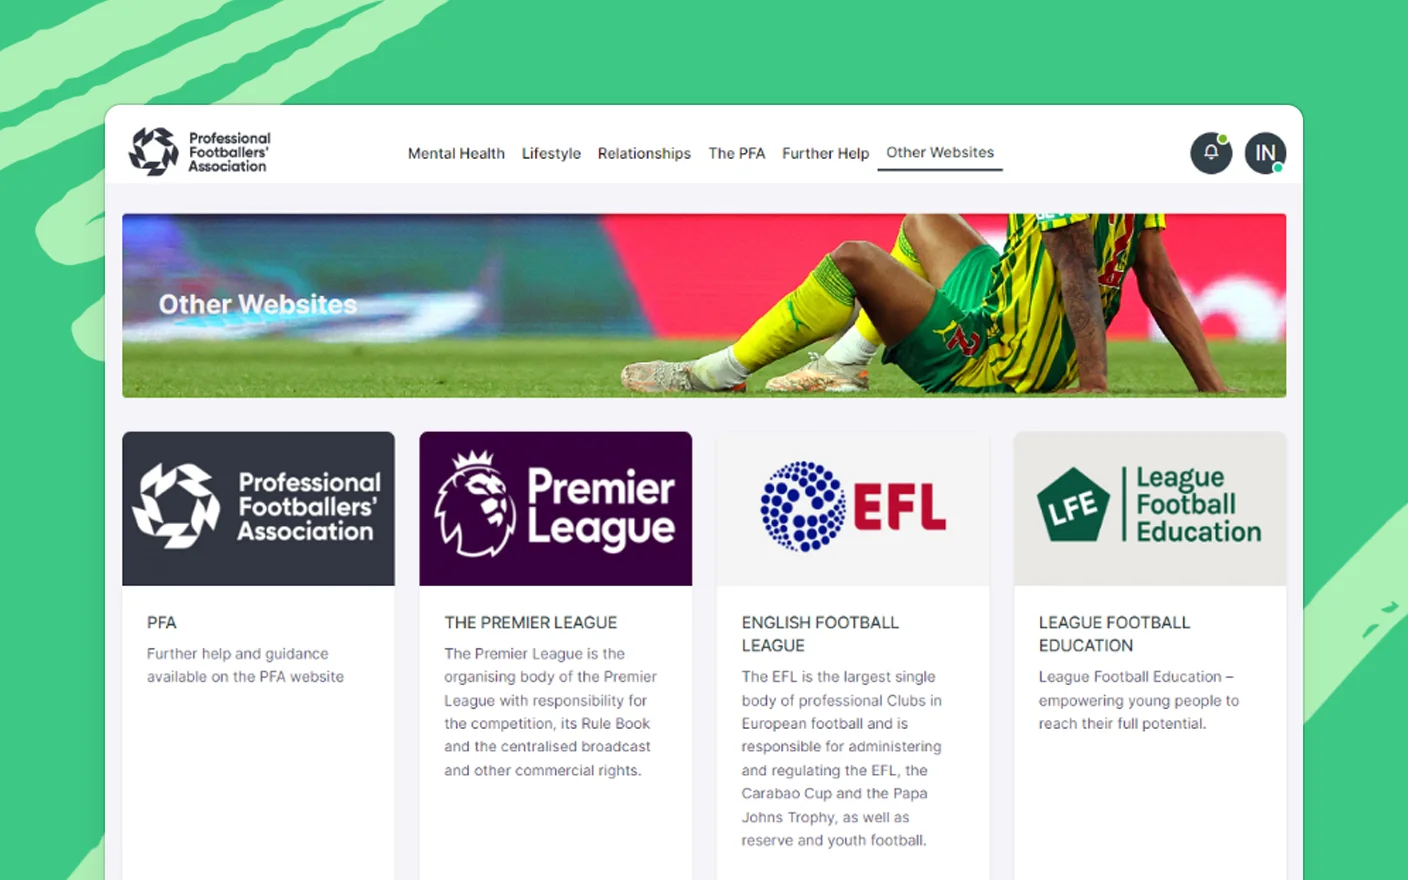 Web page section highlighting links to external sports wellness organizations like the Professional Footballers' Association and the Premier League, signposting further help and guidance.